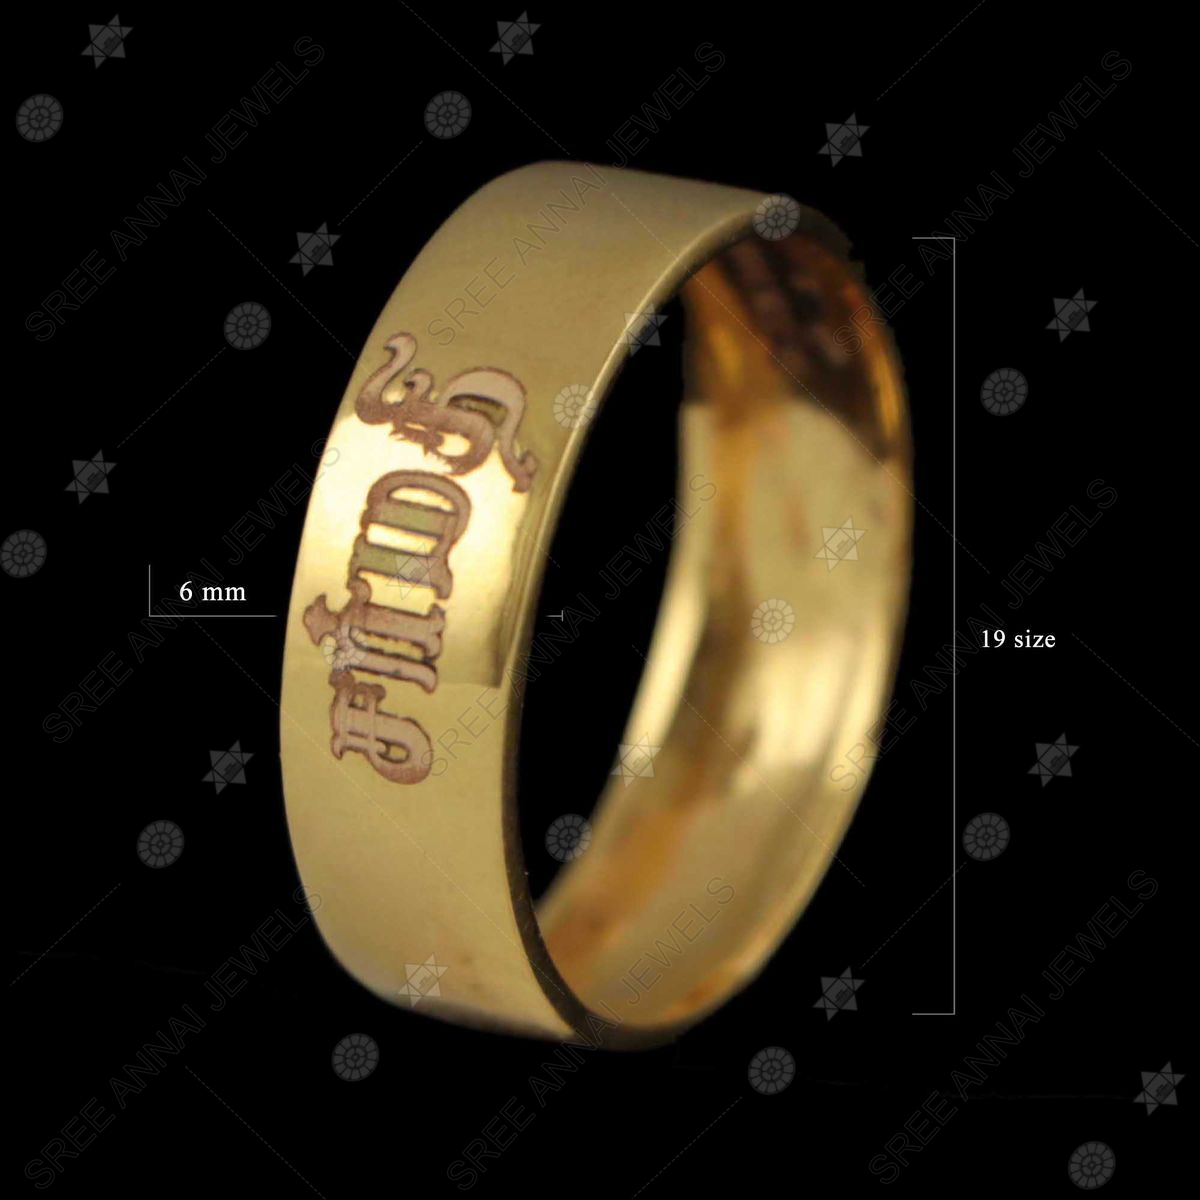 Wedding Rings Latest Price from Manufacturers, Suppliers & Traders